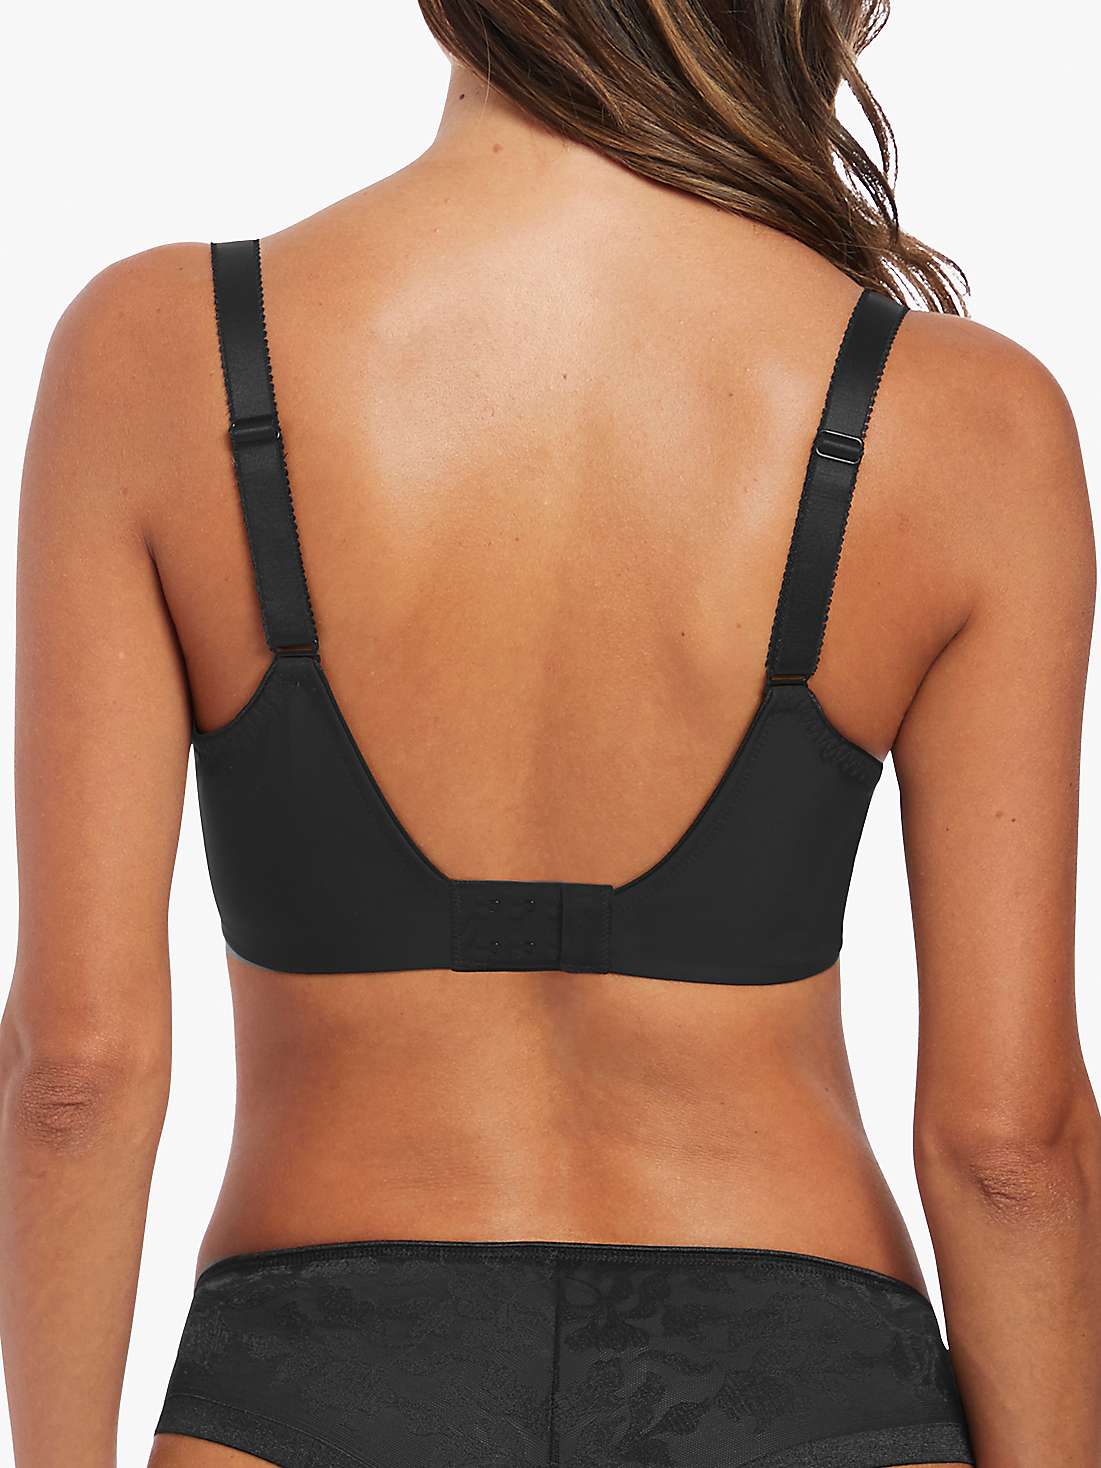 Buy Fantasie Illusion Underwired Side Support Balcony Bra Online at johnlewis.com